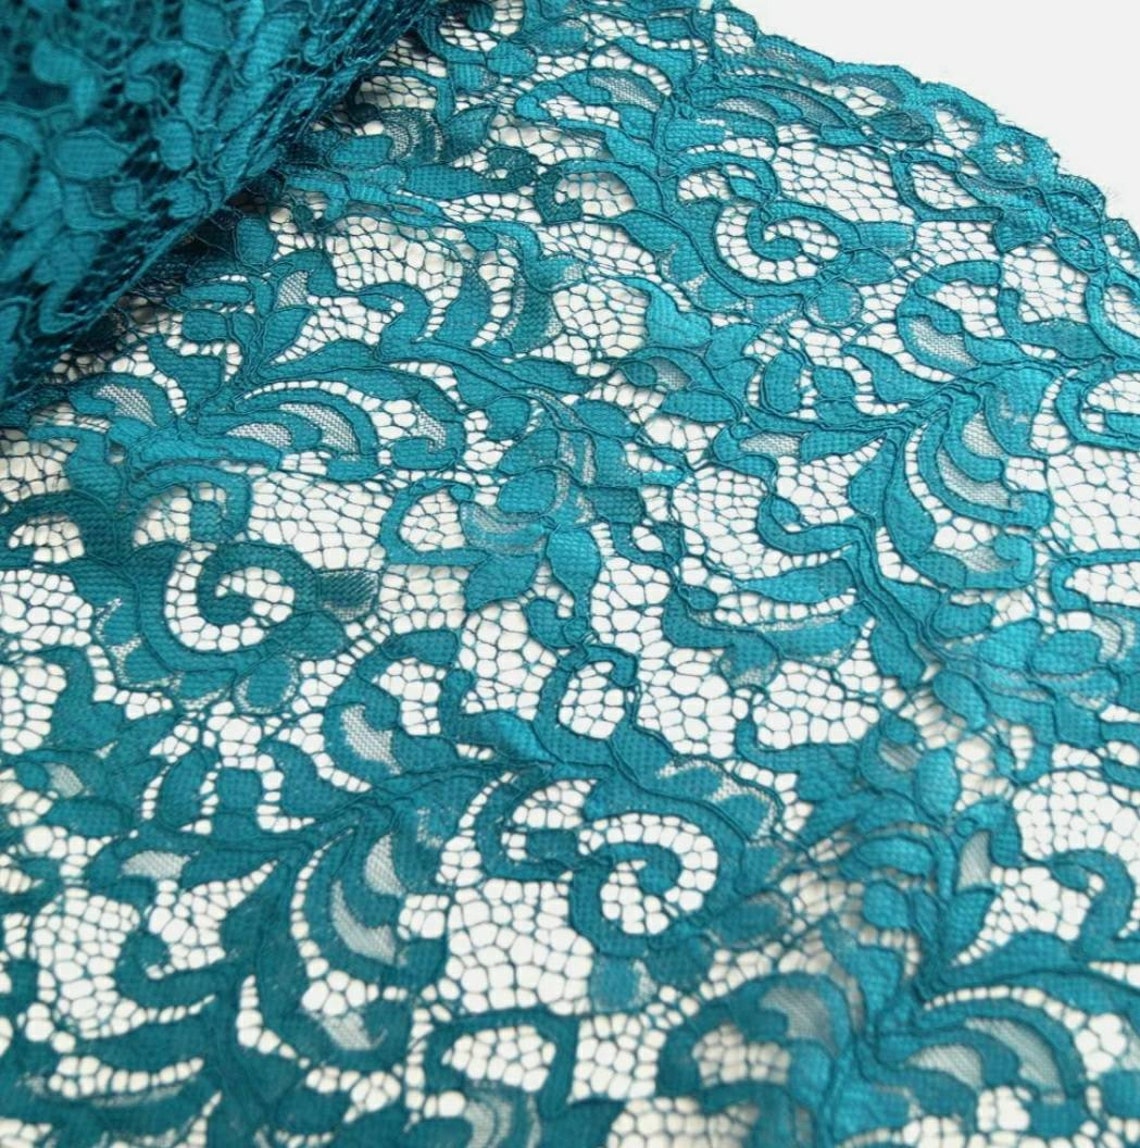 1m Teal Raschel Corded Lace Fabric by Fabric Freedom Bridal - Etsy UK